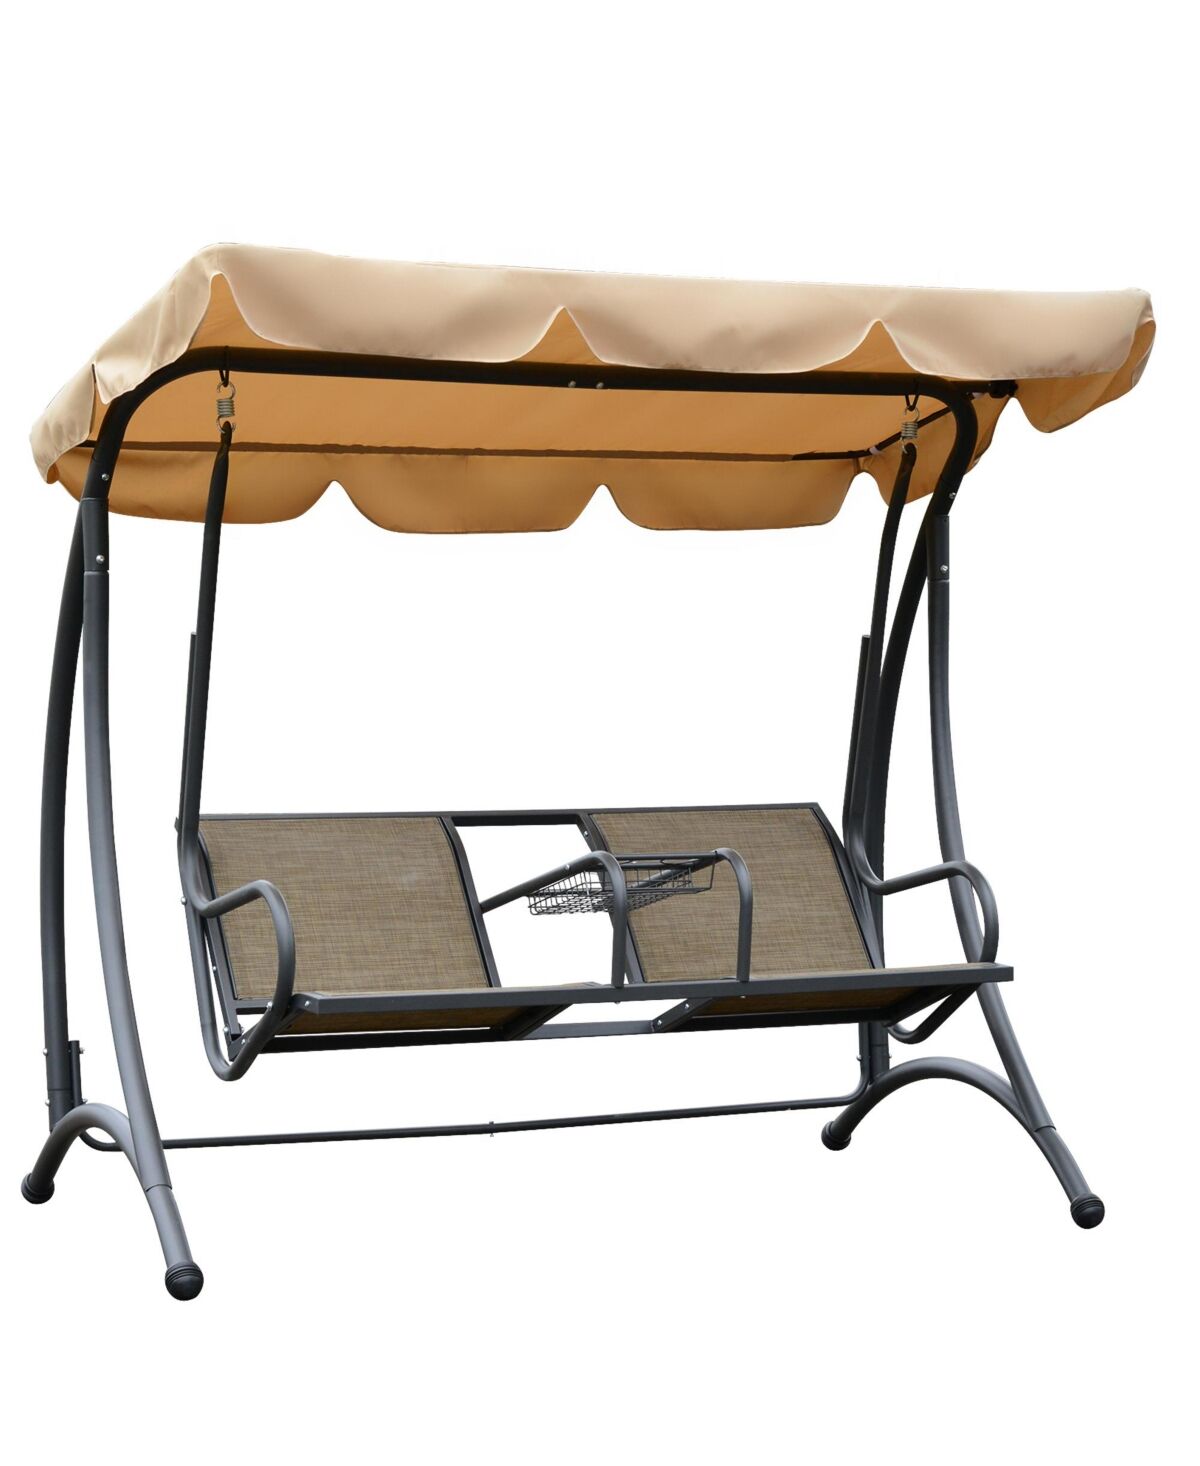 Outsunny 2-Person Outdoor Swing, Patio Swing Bench with Adjustable Tilt Canopy, Cup Holder and Storage Tray, Steel Frame, Brown - Brown